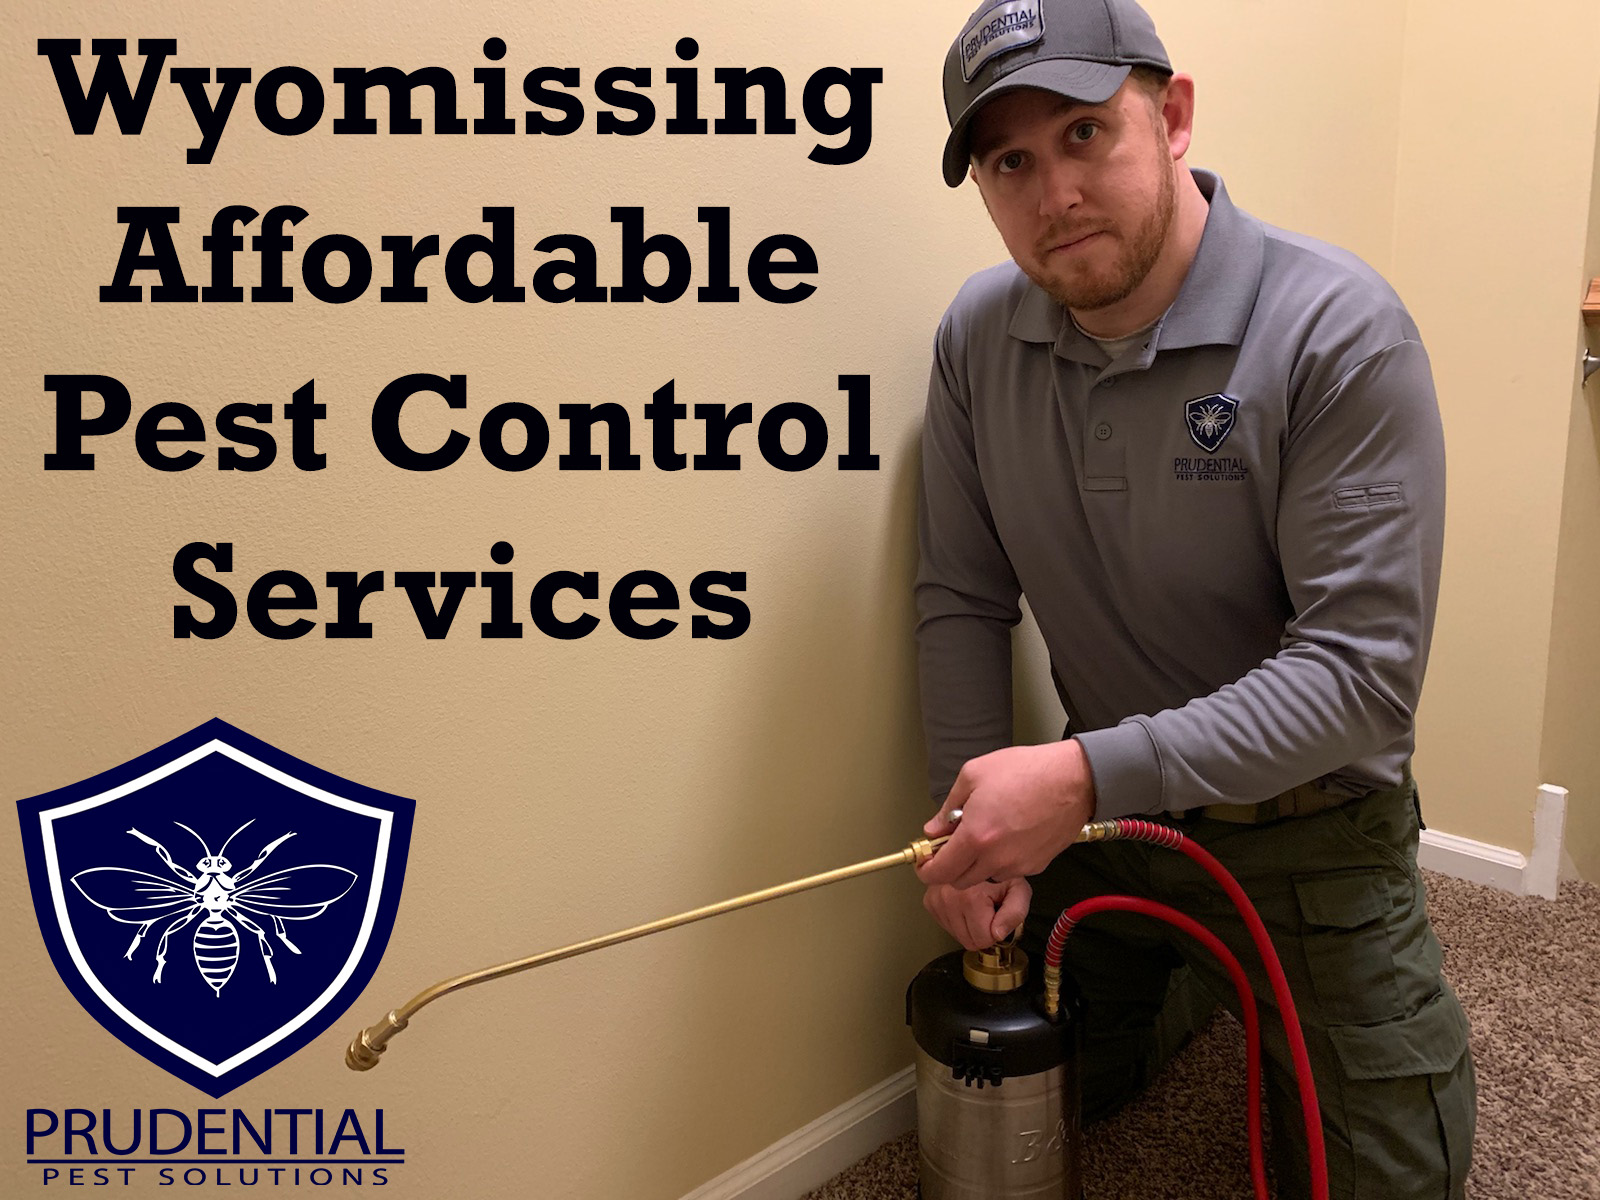 Wyomissing Pest Services - Prudential Pest Solutions